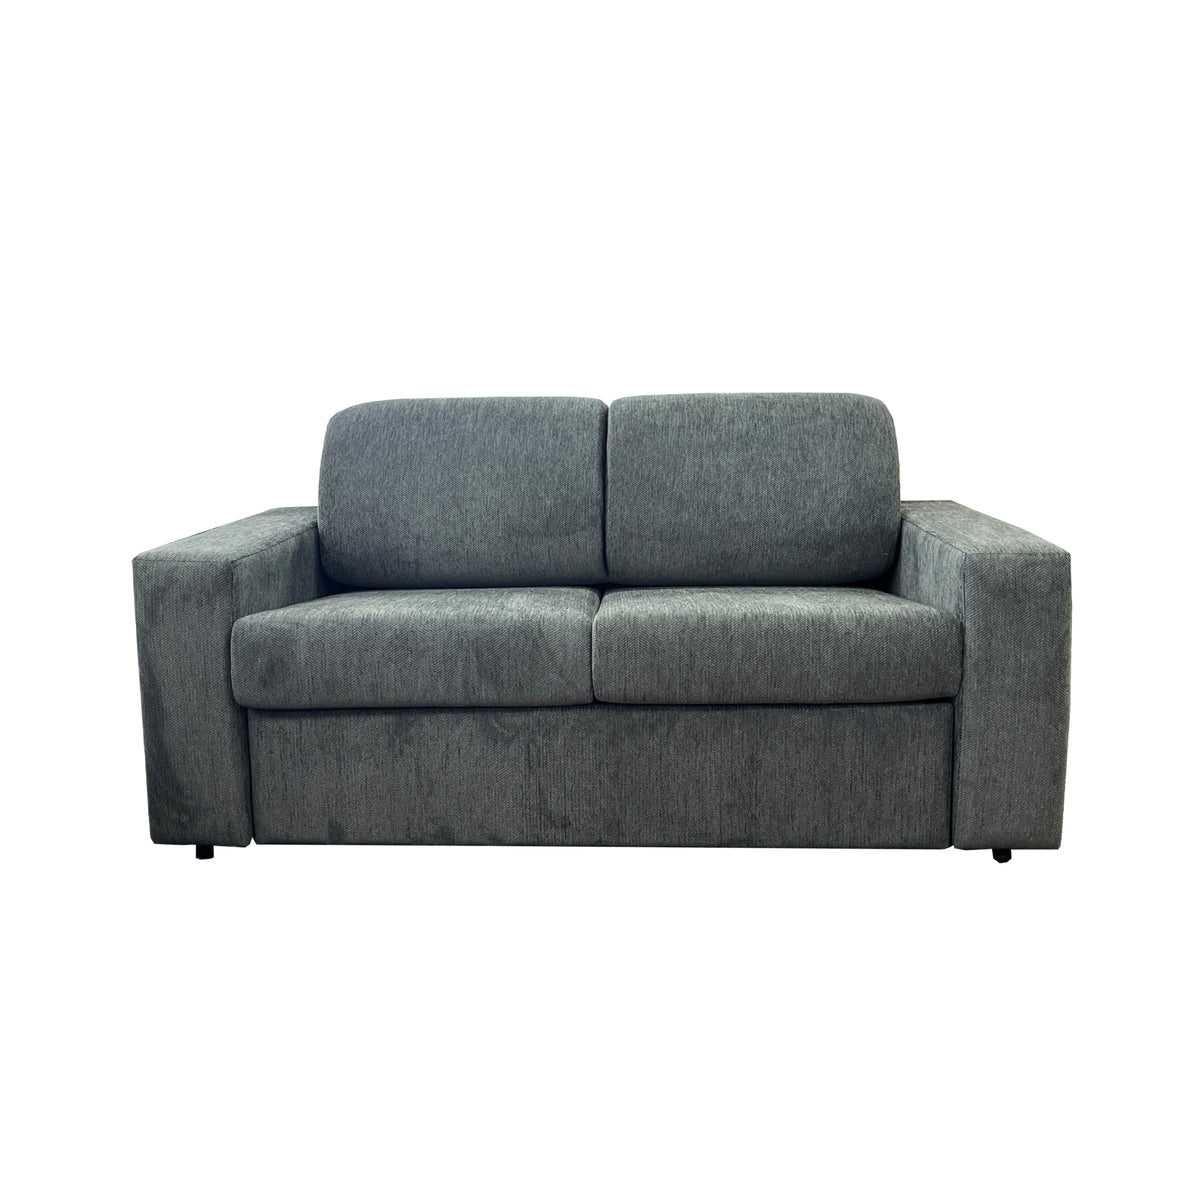 Burton Sofabed Double Size - Nz Made - Dalton Charcoal Fabric